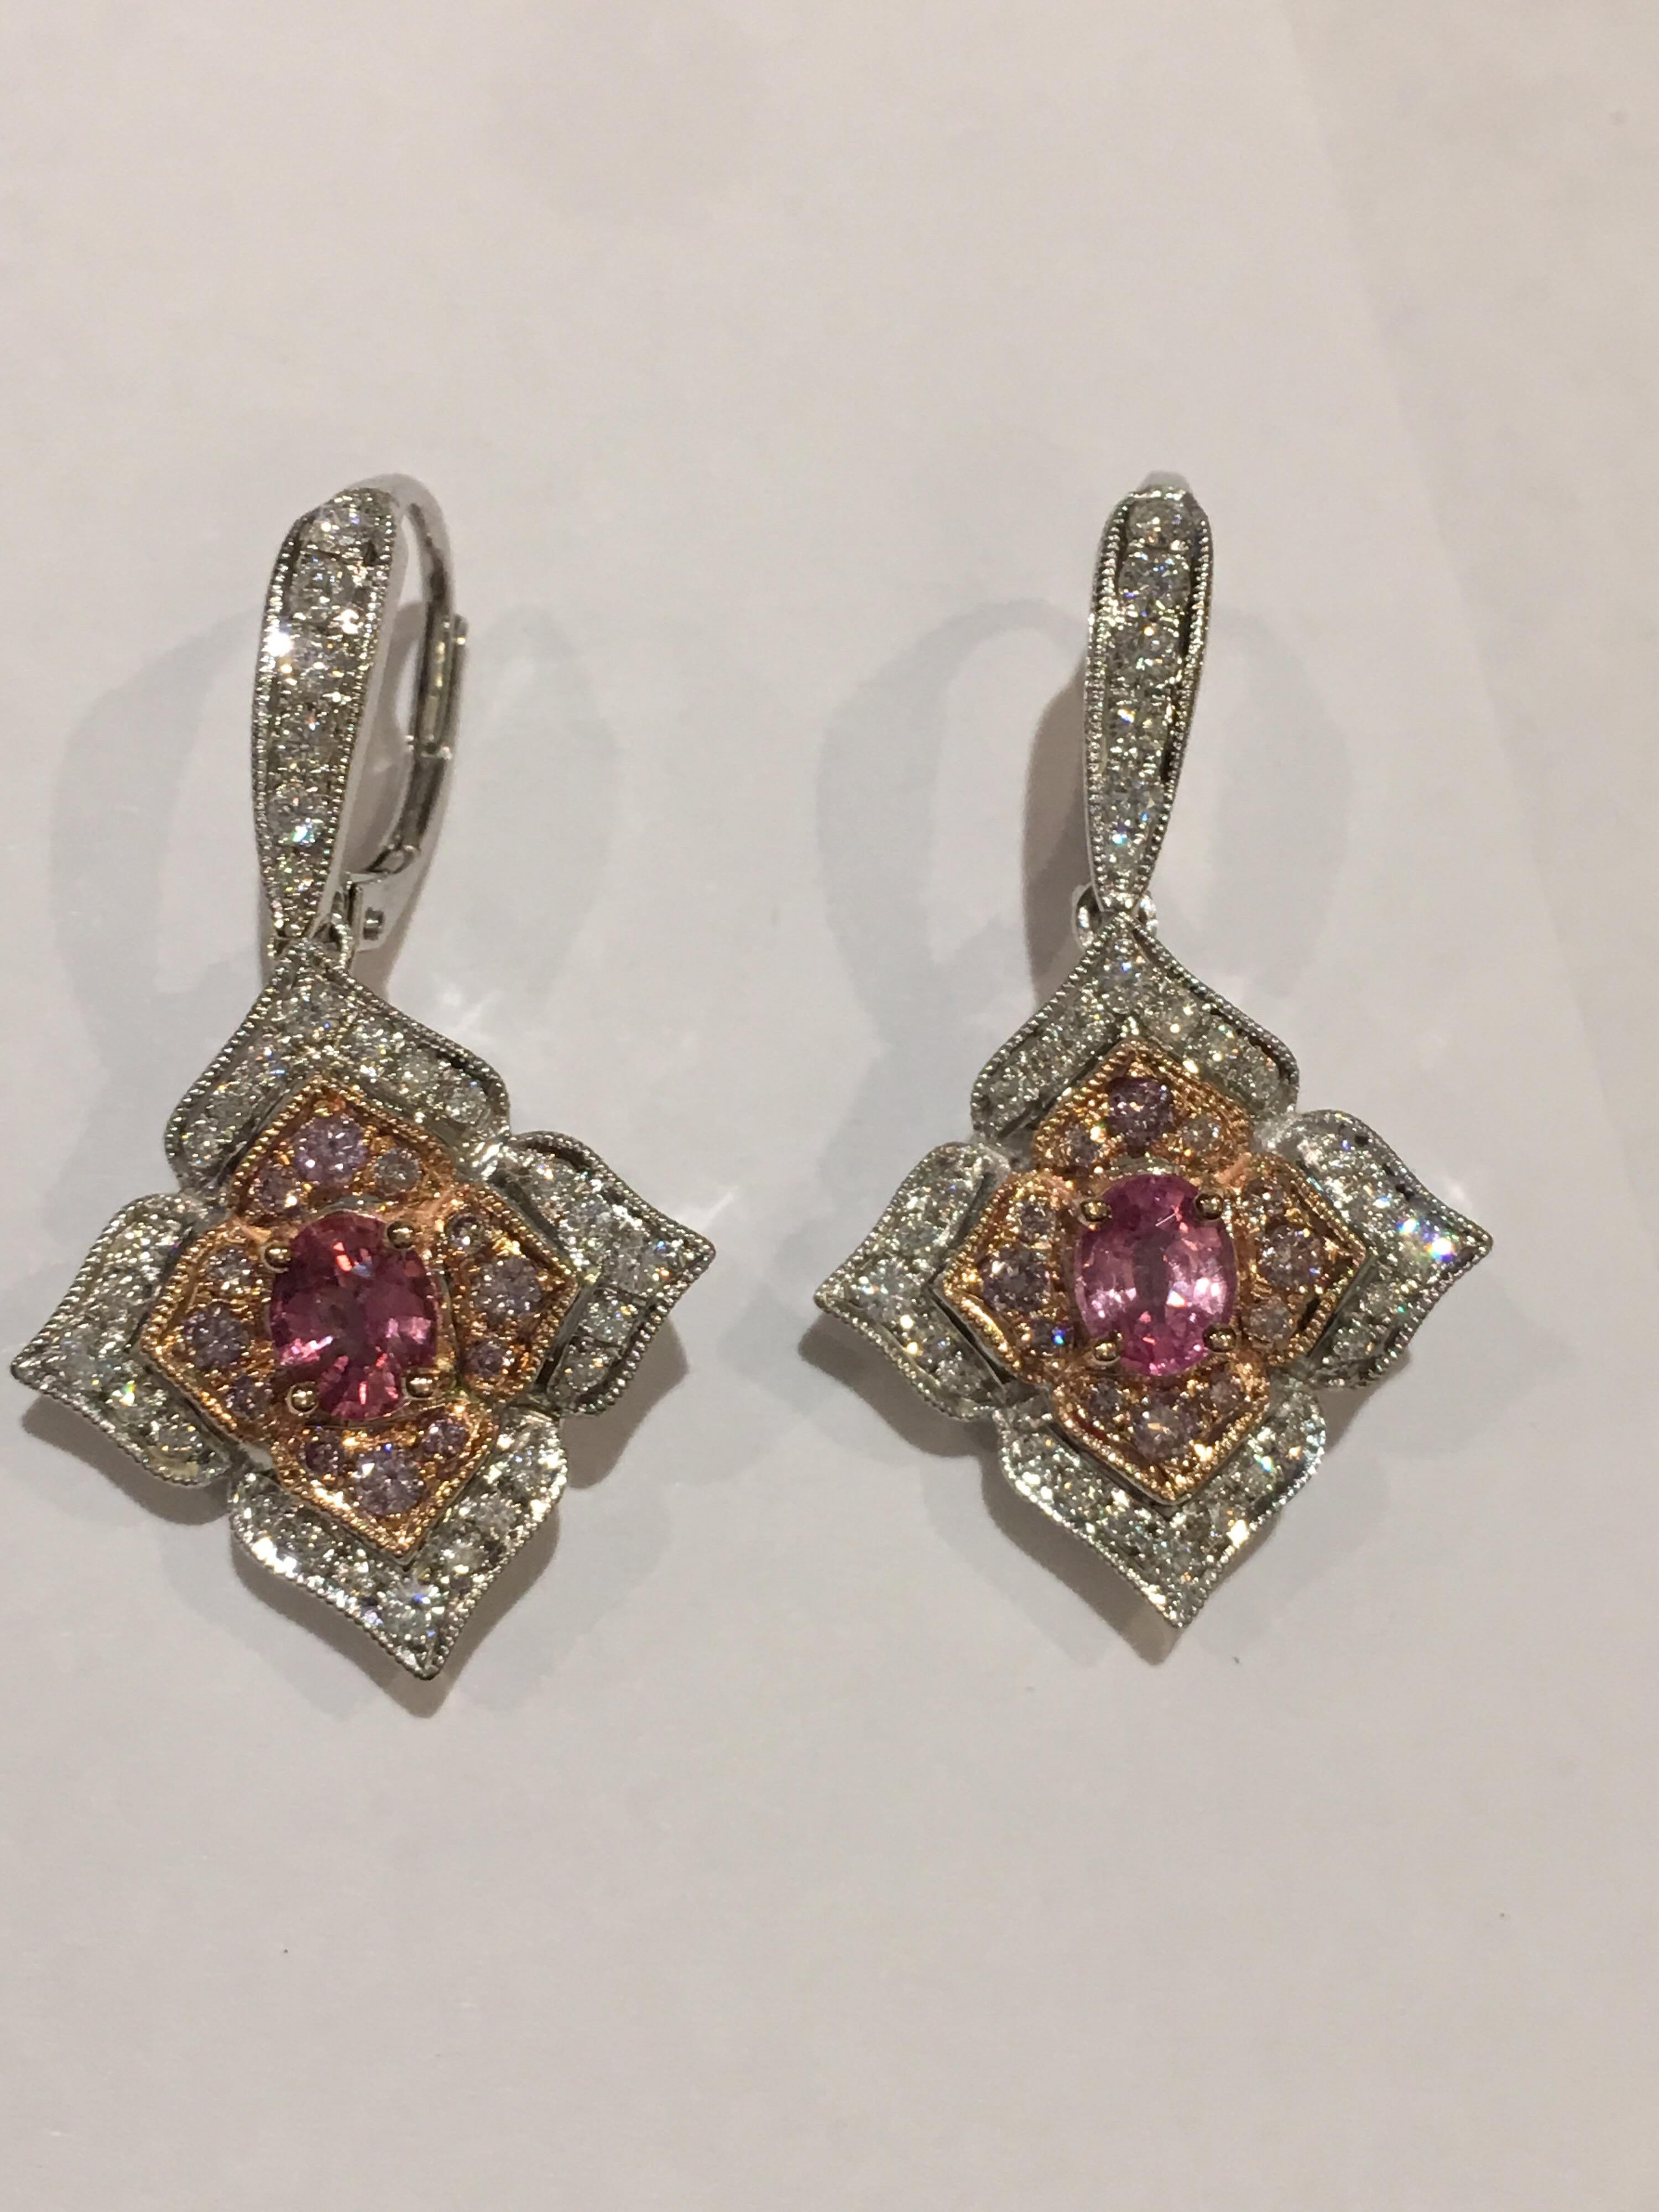 Artist Padparadscha Sapphire Pink and White Diamonds Earrings Set in 14 Karat Gold